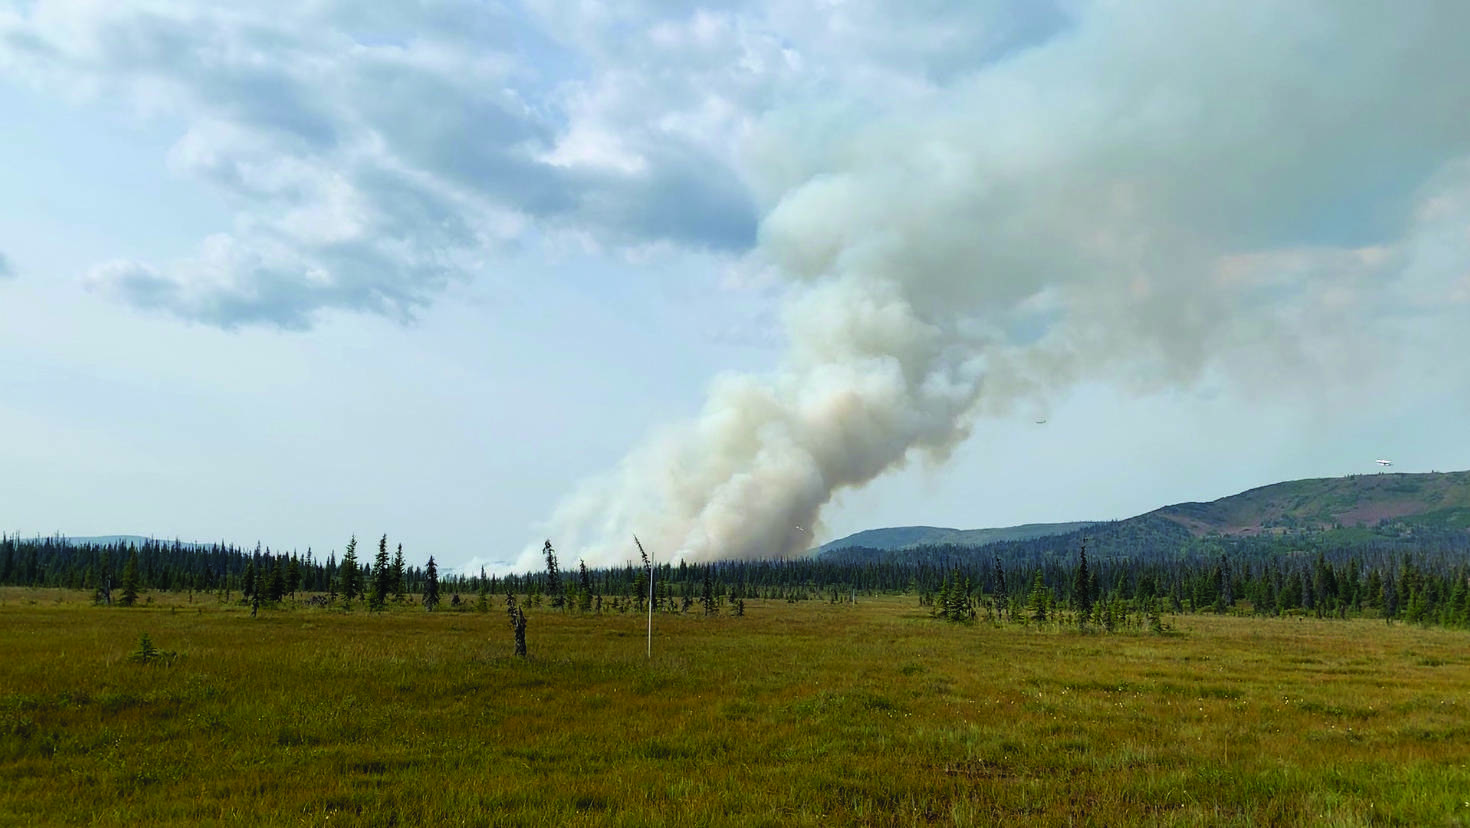 This photo of the Caribou Lake fire was taken about 4 p.m. Monday, Aug. 19, 2019, northeast of Homer, Alaska, about two hours after Ian Pitzman texted a message reporting the fire to his wife, Stephanie Pitzman, via an inReach satellite communication device. (Photo by Ian Pitzman)